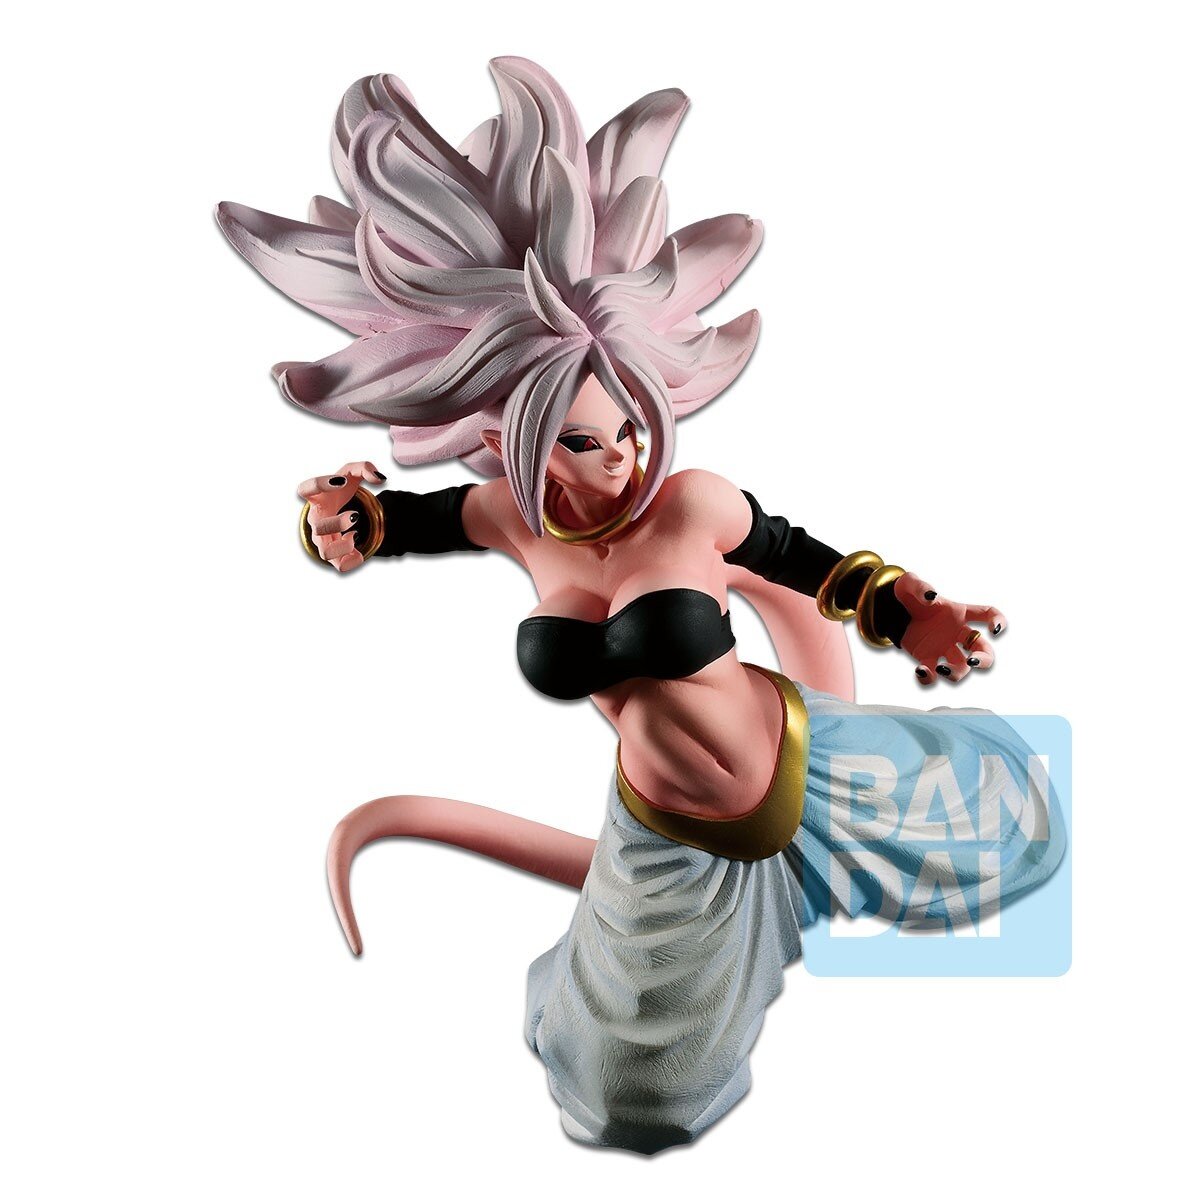 Figure dragon ball super - android 21 - the android battle ref